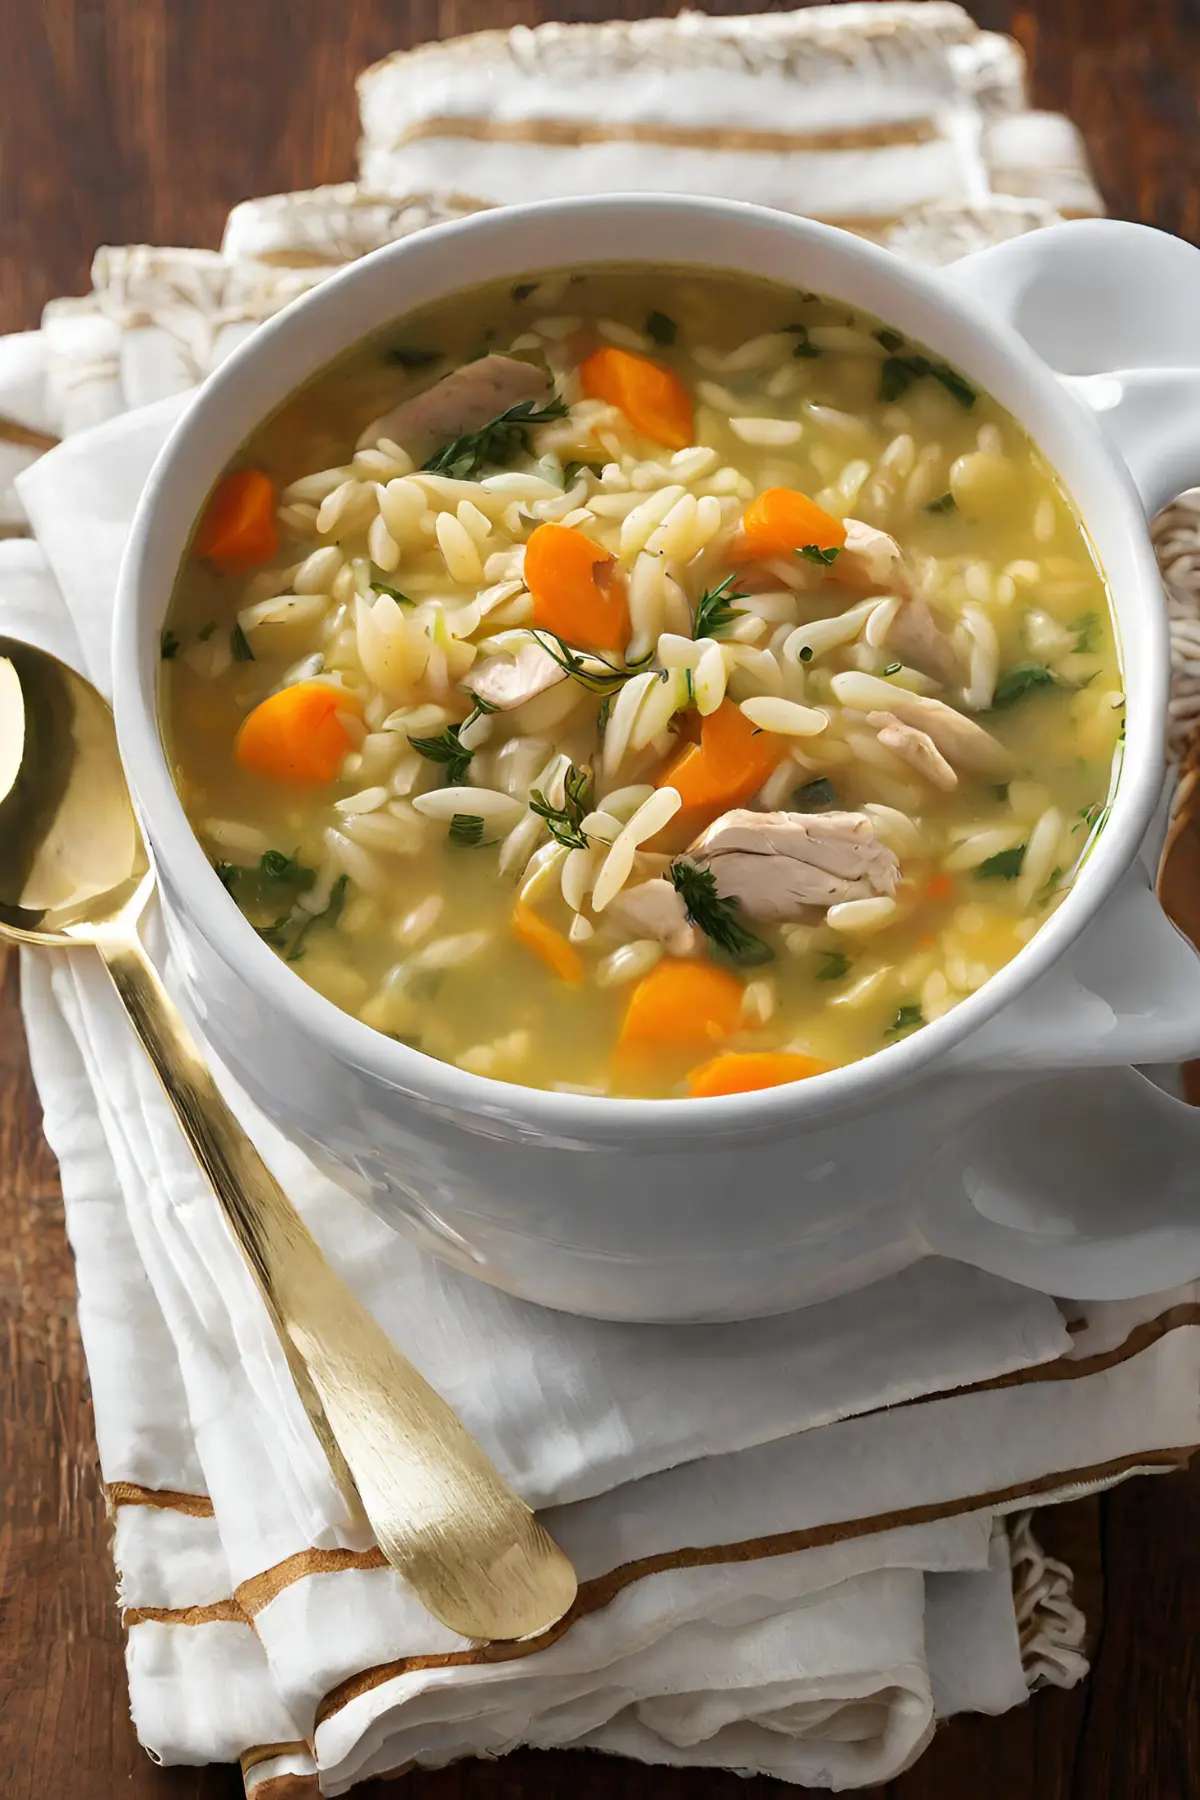 Step-by-Step Cooking Instructions for Golden Chicken Orzo Soup